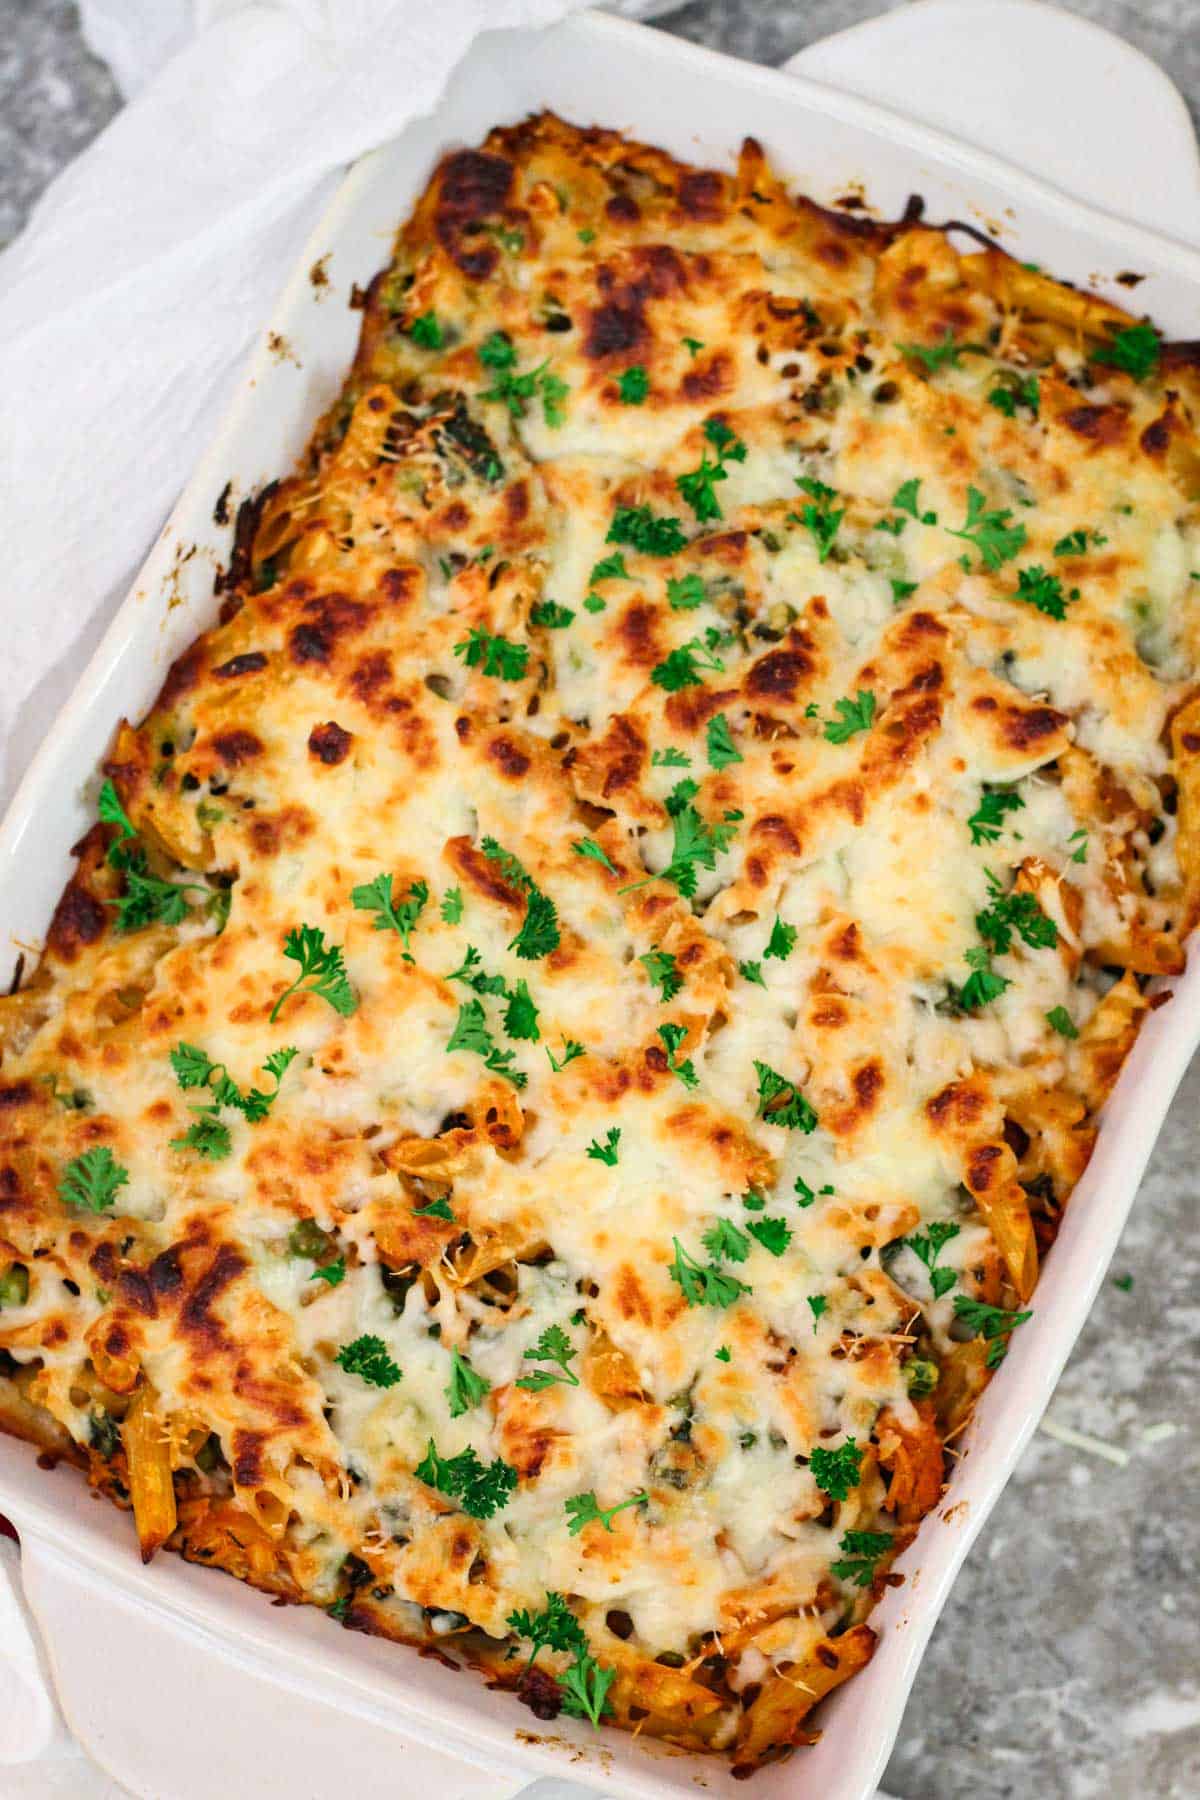 A casserole dish with baked penne pasta, covered in cheese and garnished with fresh parsley.